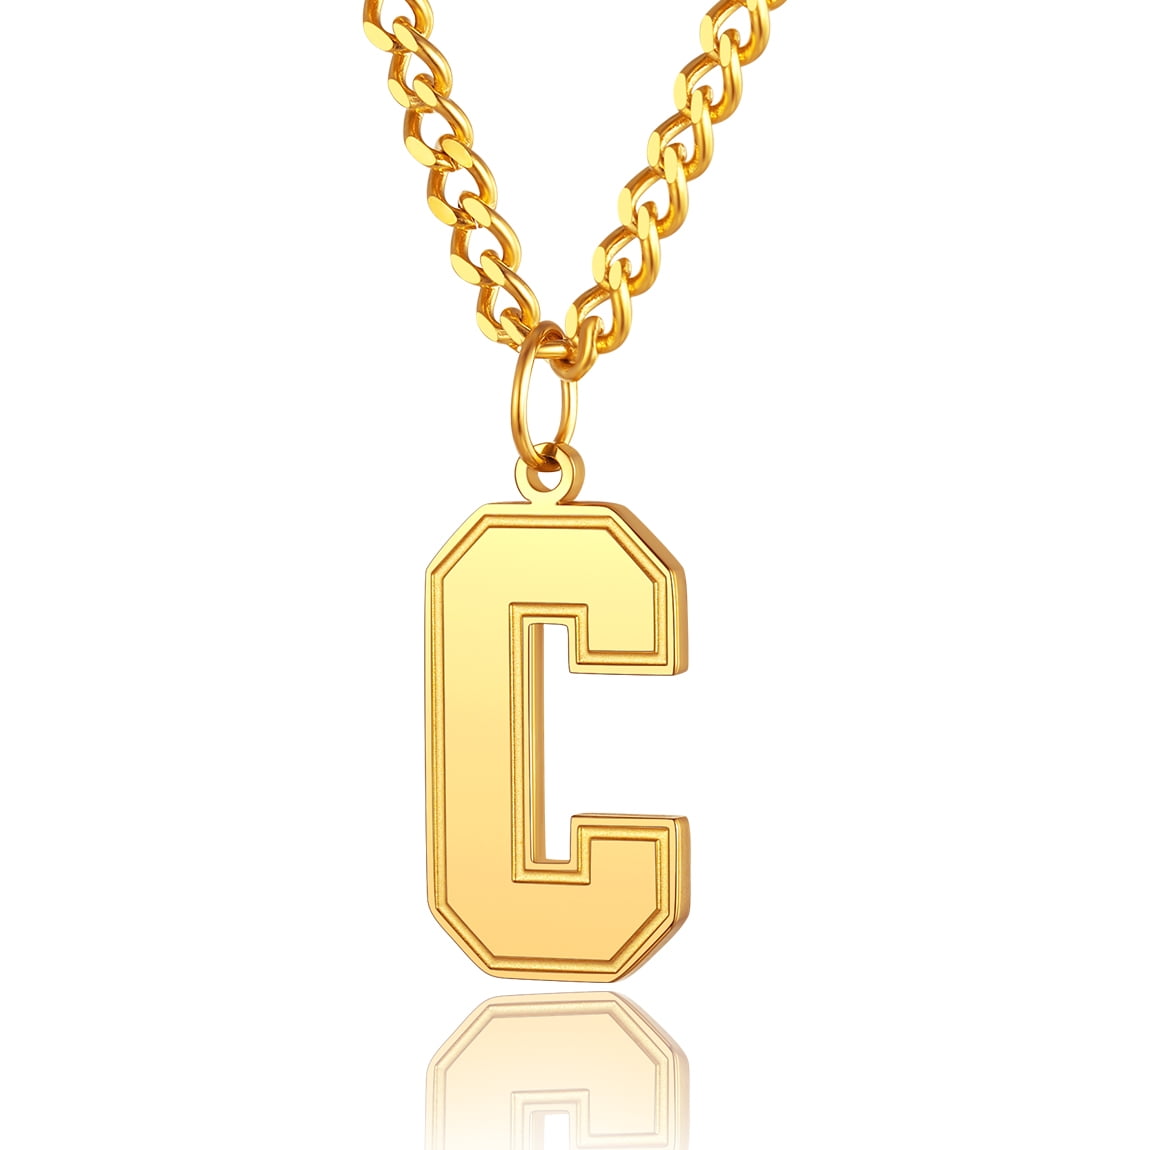 Initial Letter Necklace | Custom Necklace and Chains